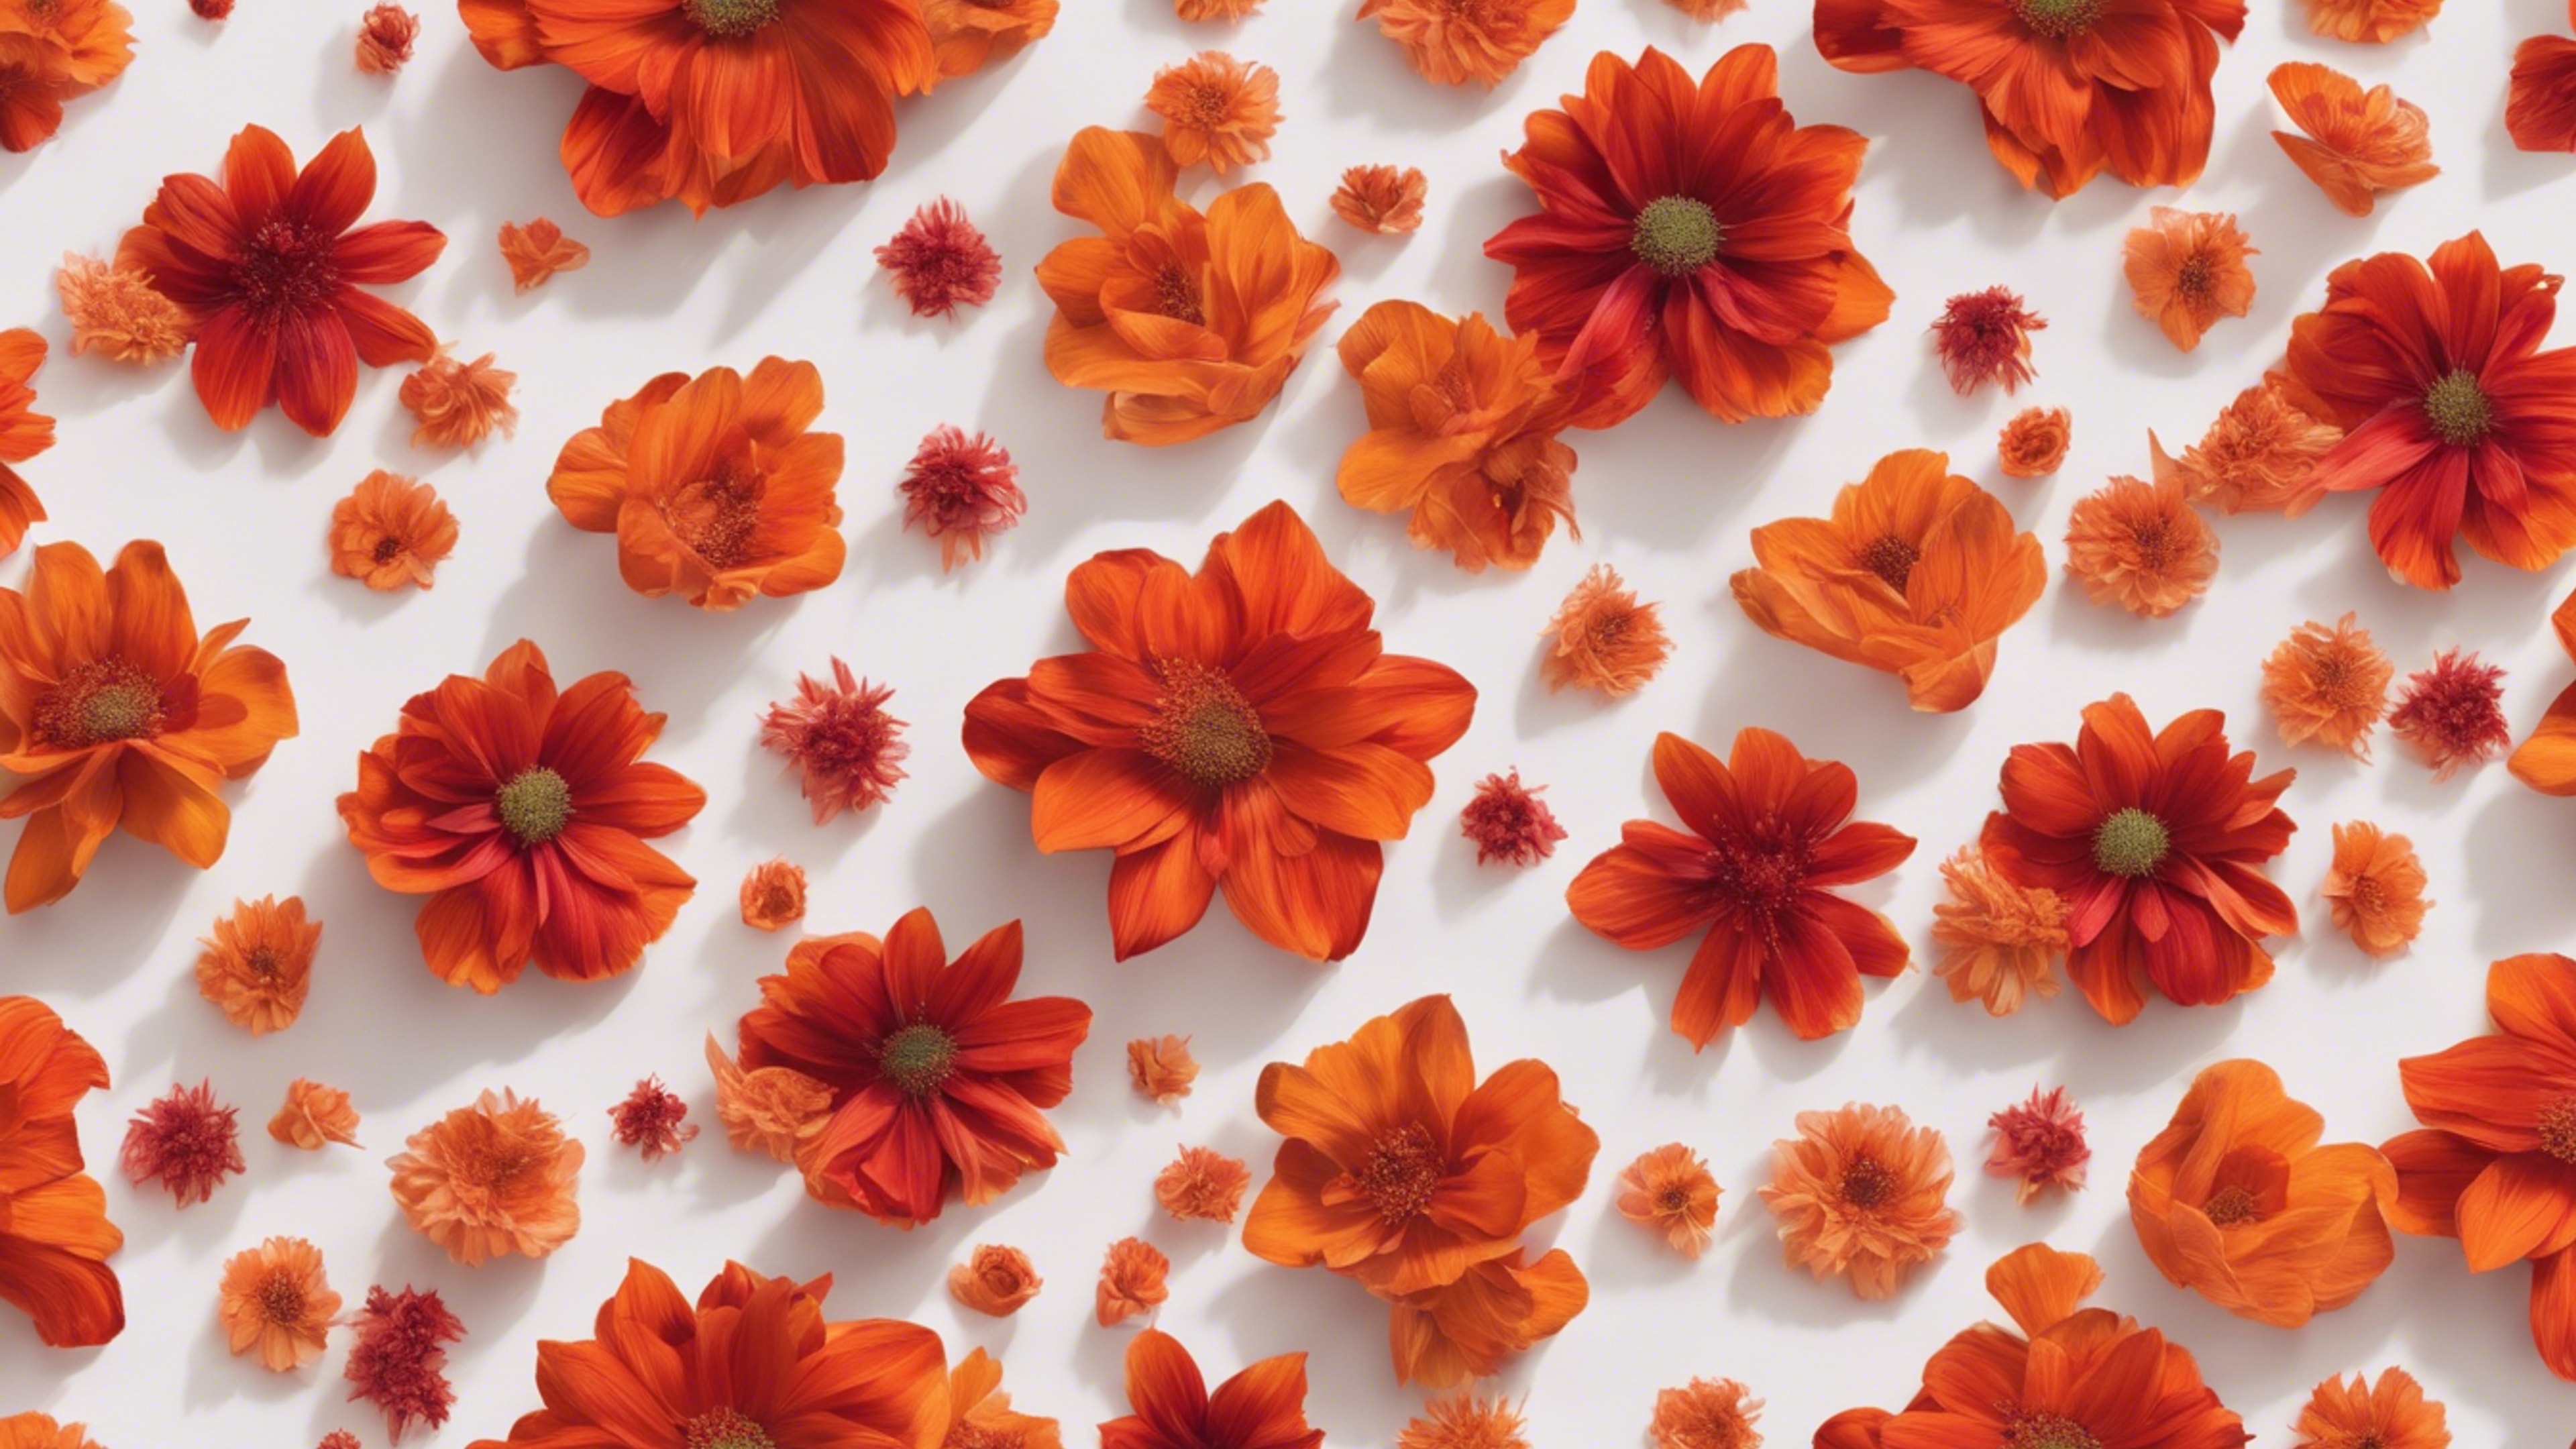 Vibrantly swirling patterns of red and orange flowers that consist of delicate petals and leaves in a seamless layout. ورق الجدران[1a3317c1e5234fee8b43]